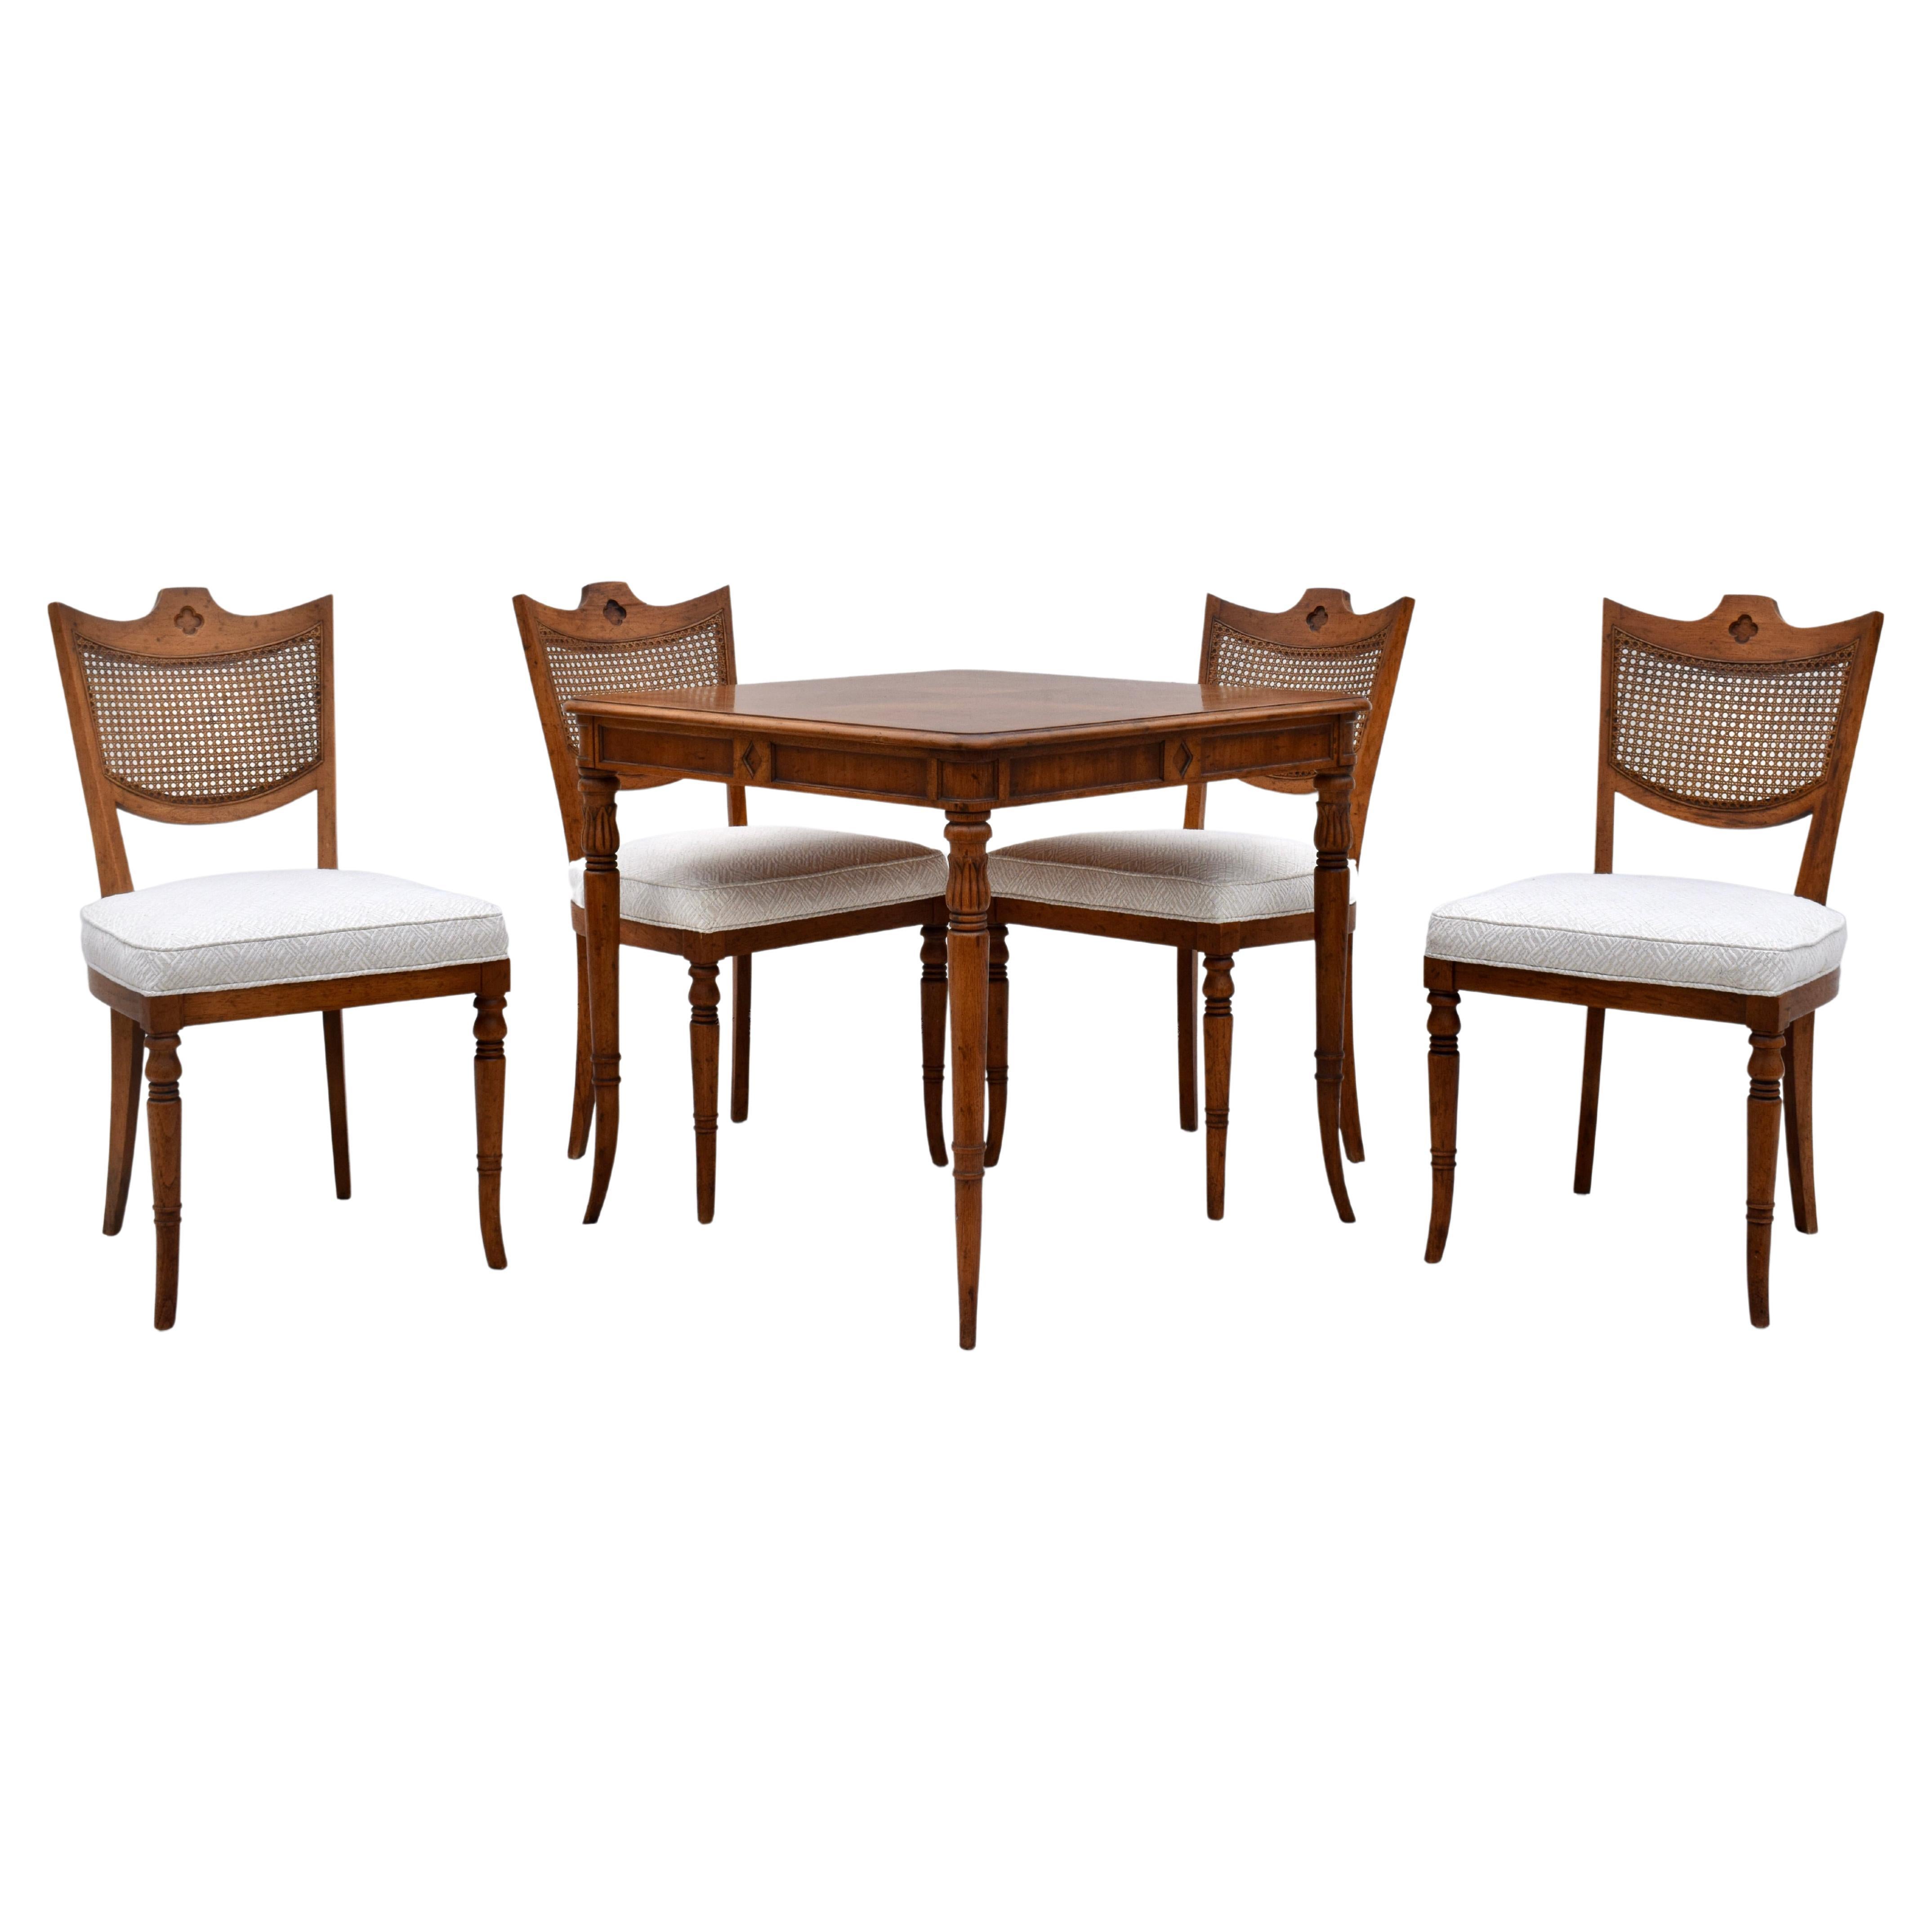 1960's French Style Game Table with Four Caned Chairs by Heritage Furniture